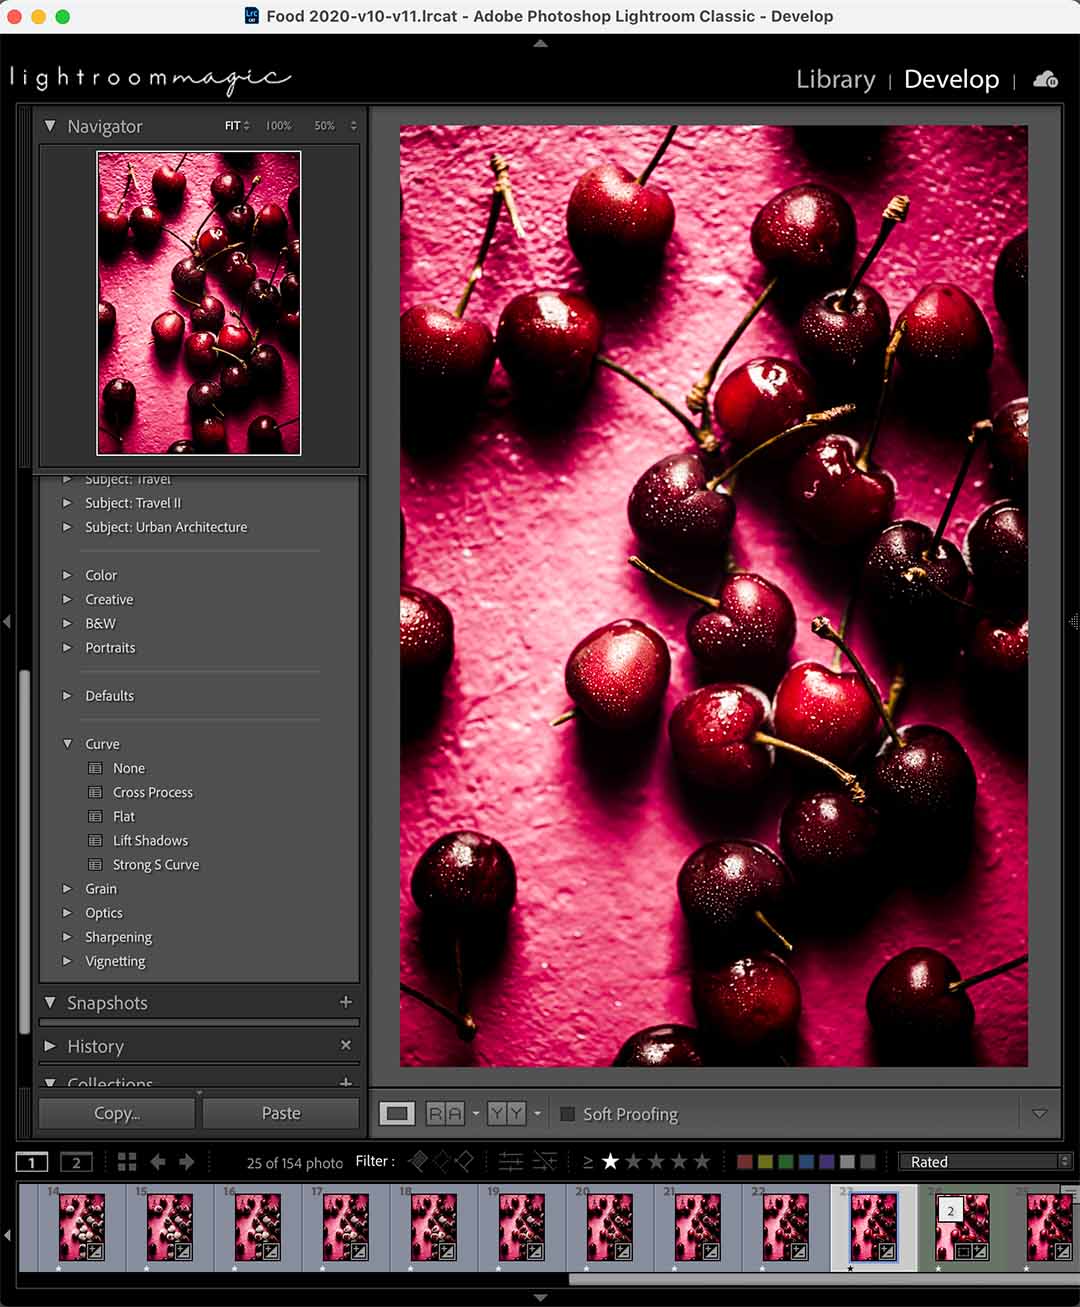 Your Ultimate Guide to Lightroom Tools in Capture One